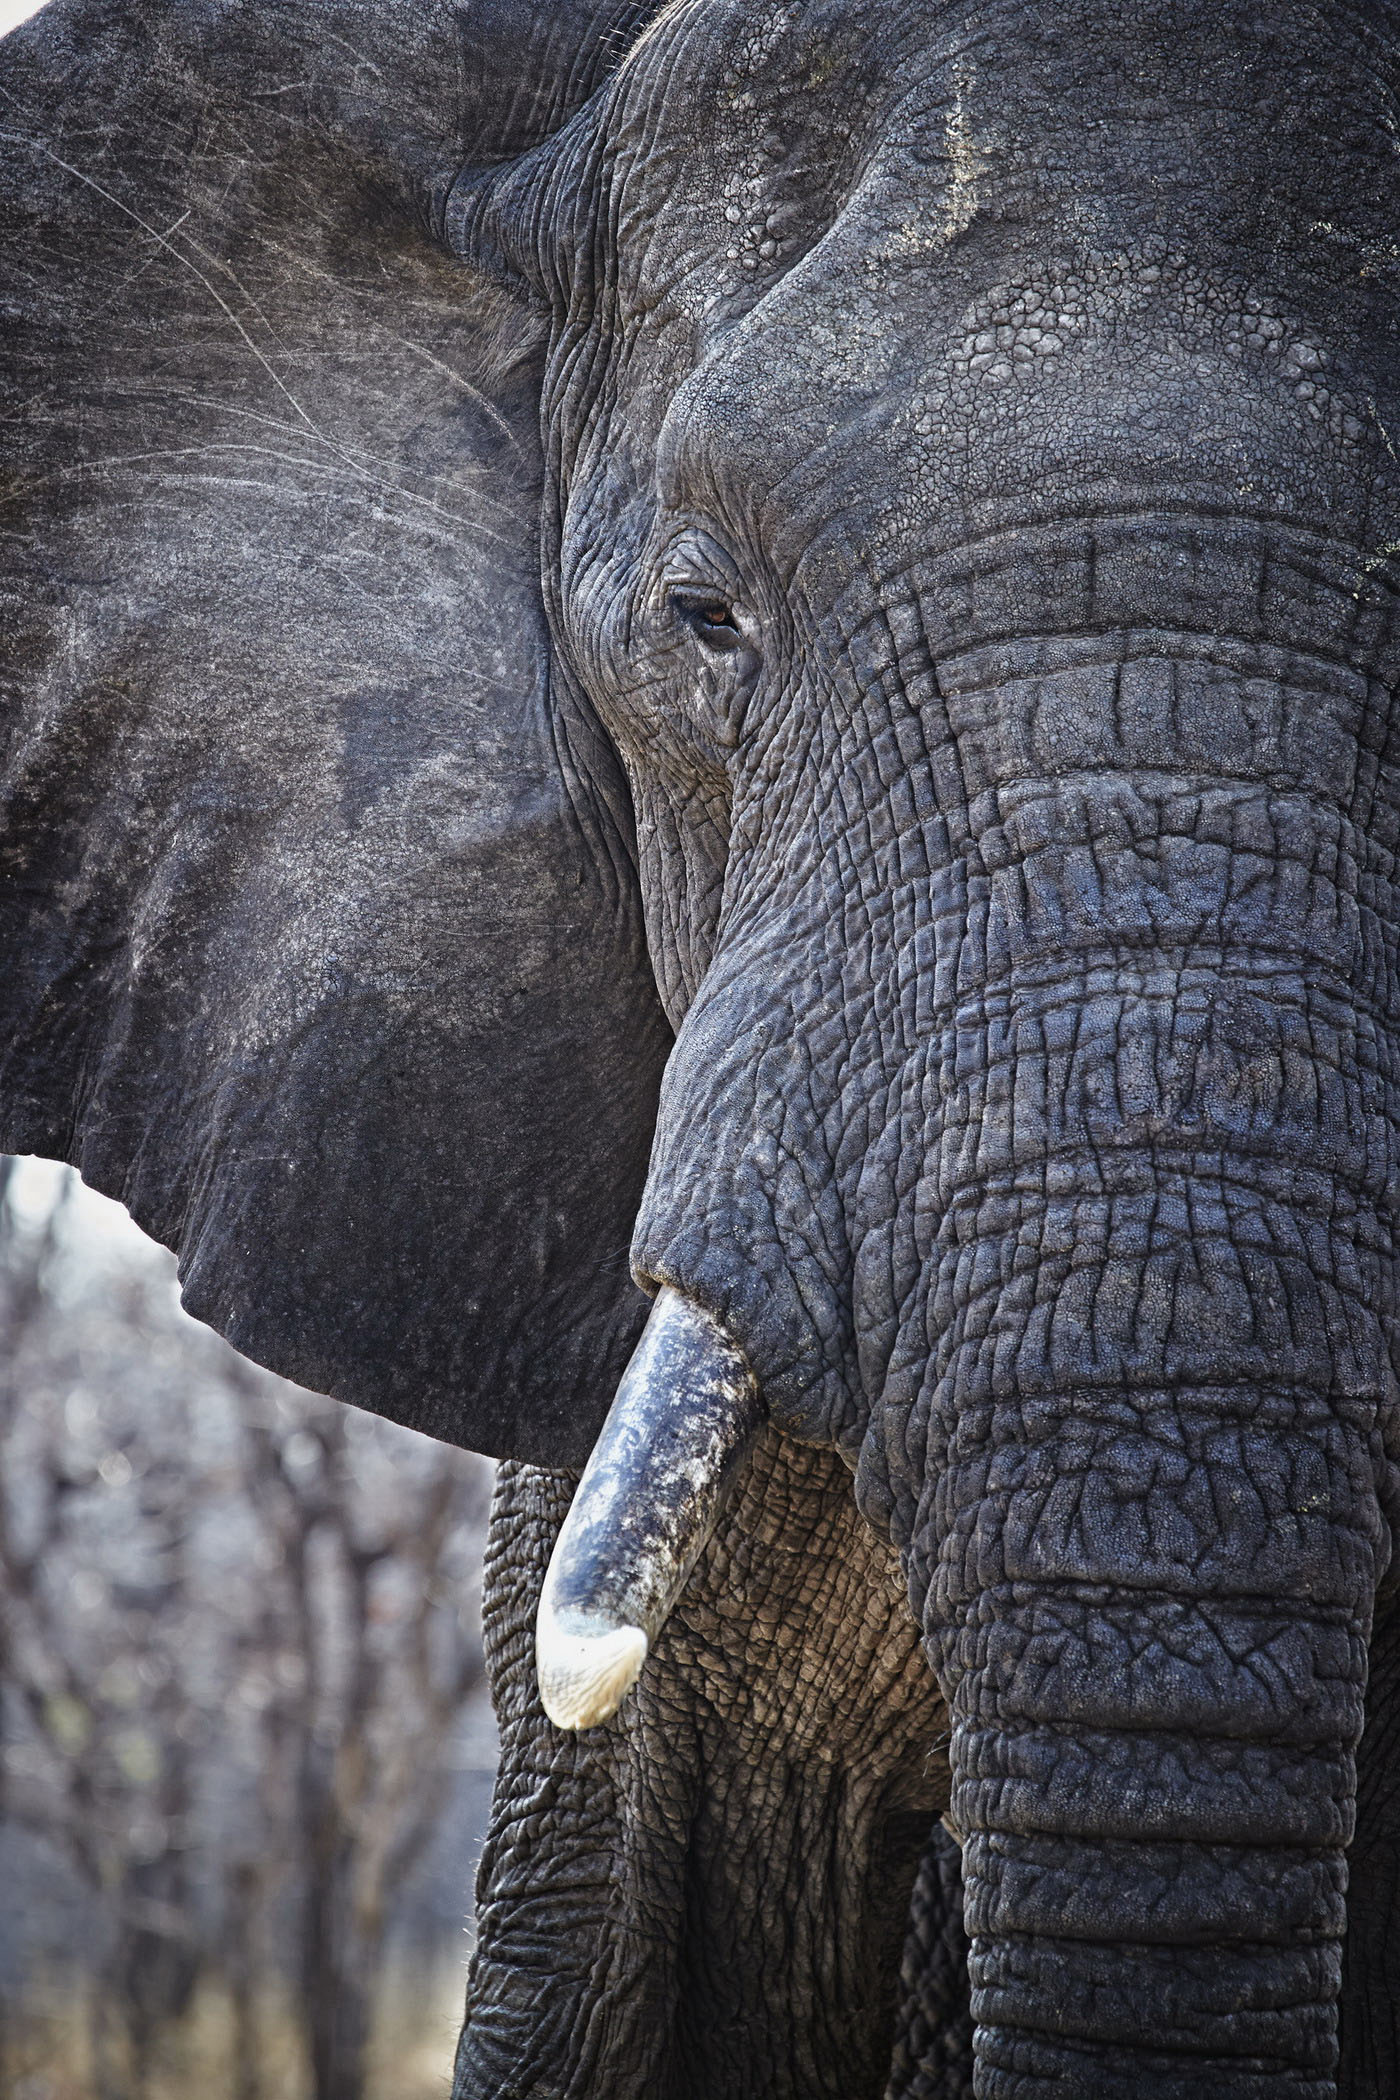 Southern Malawi Over 900 African elephants call bio-diverse Liwonde home - photo 18